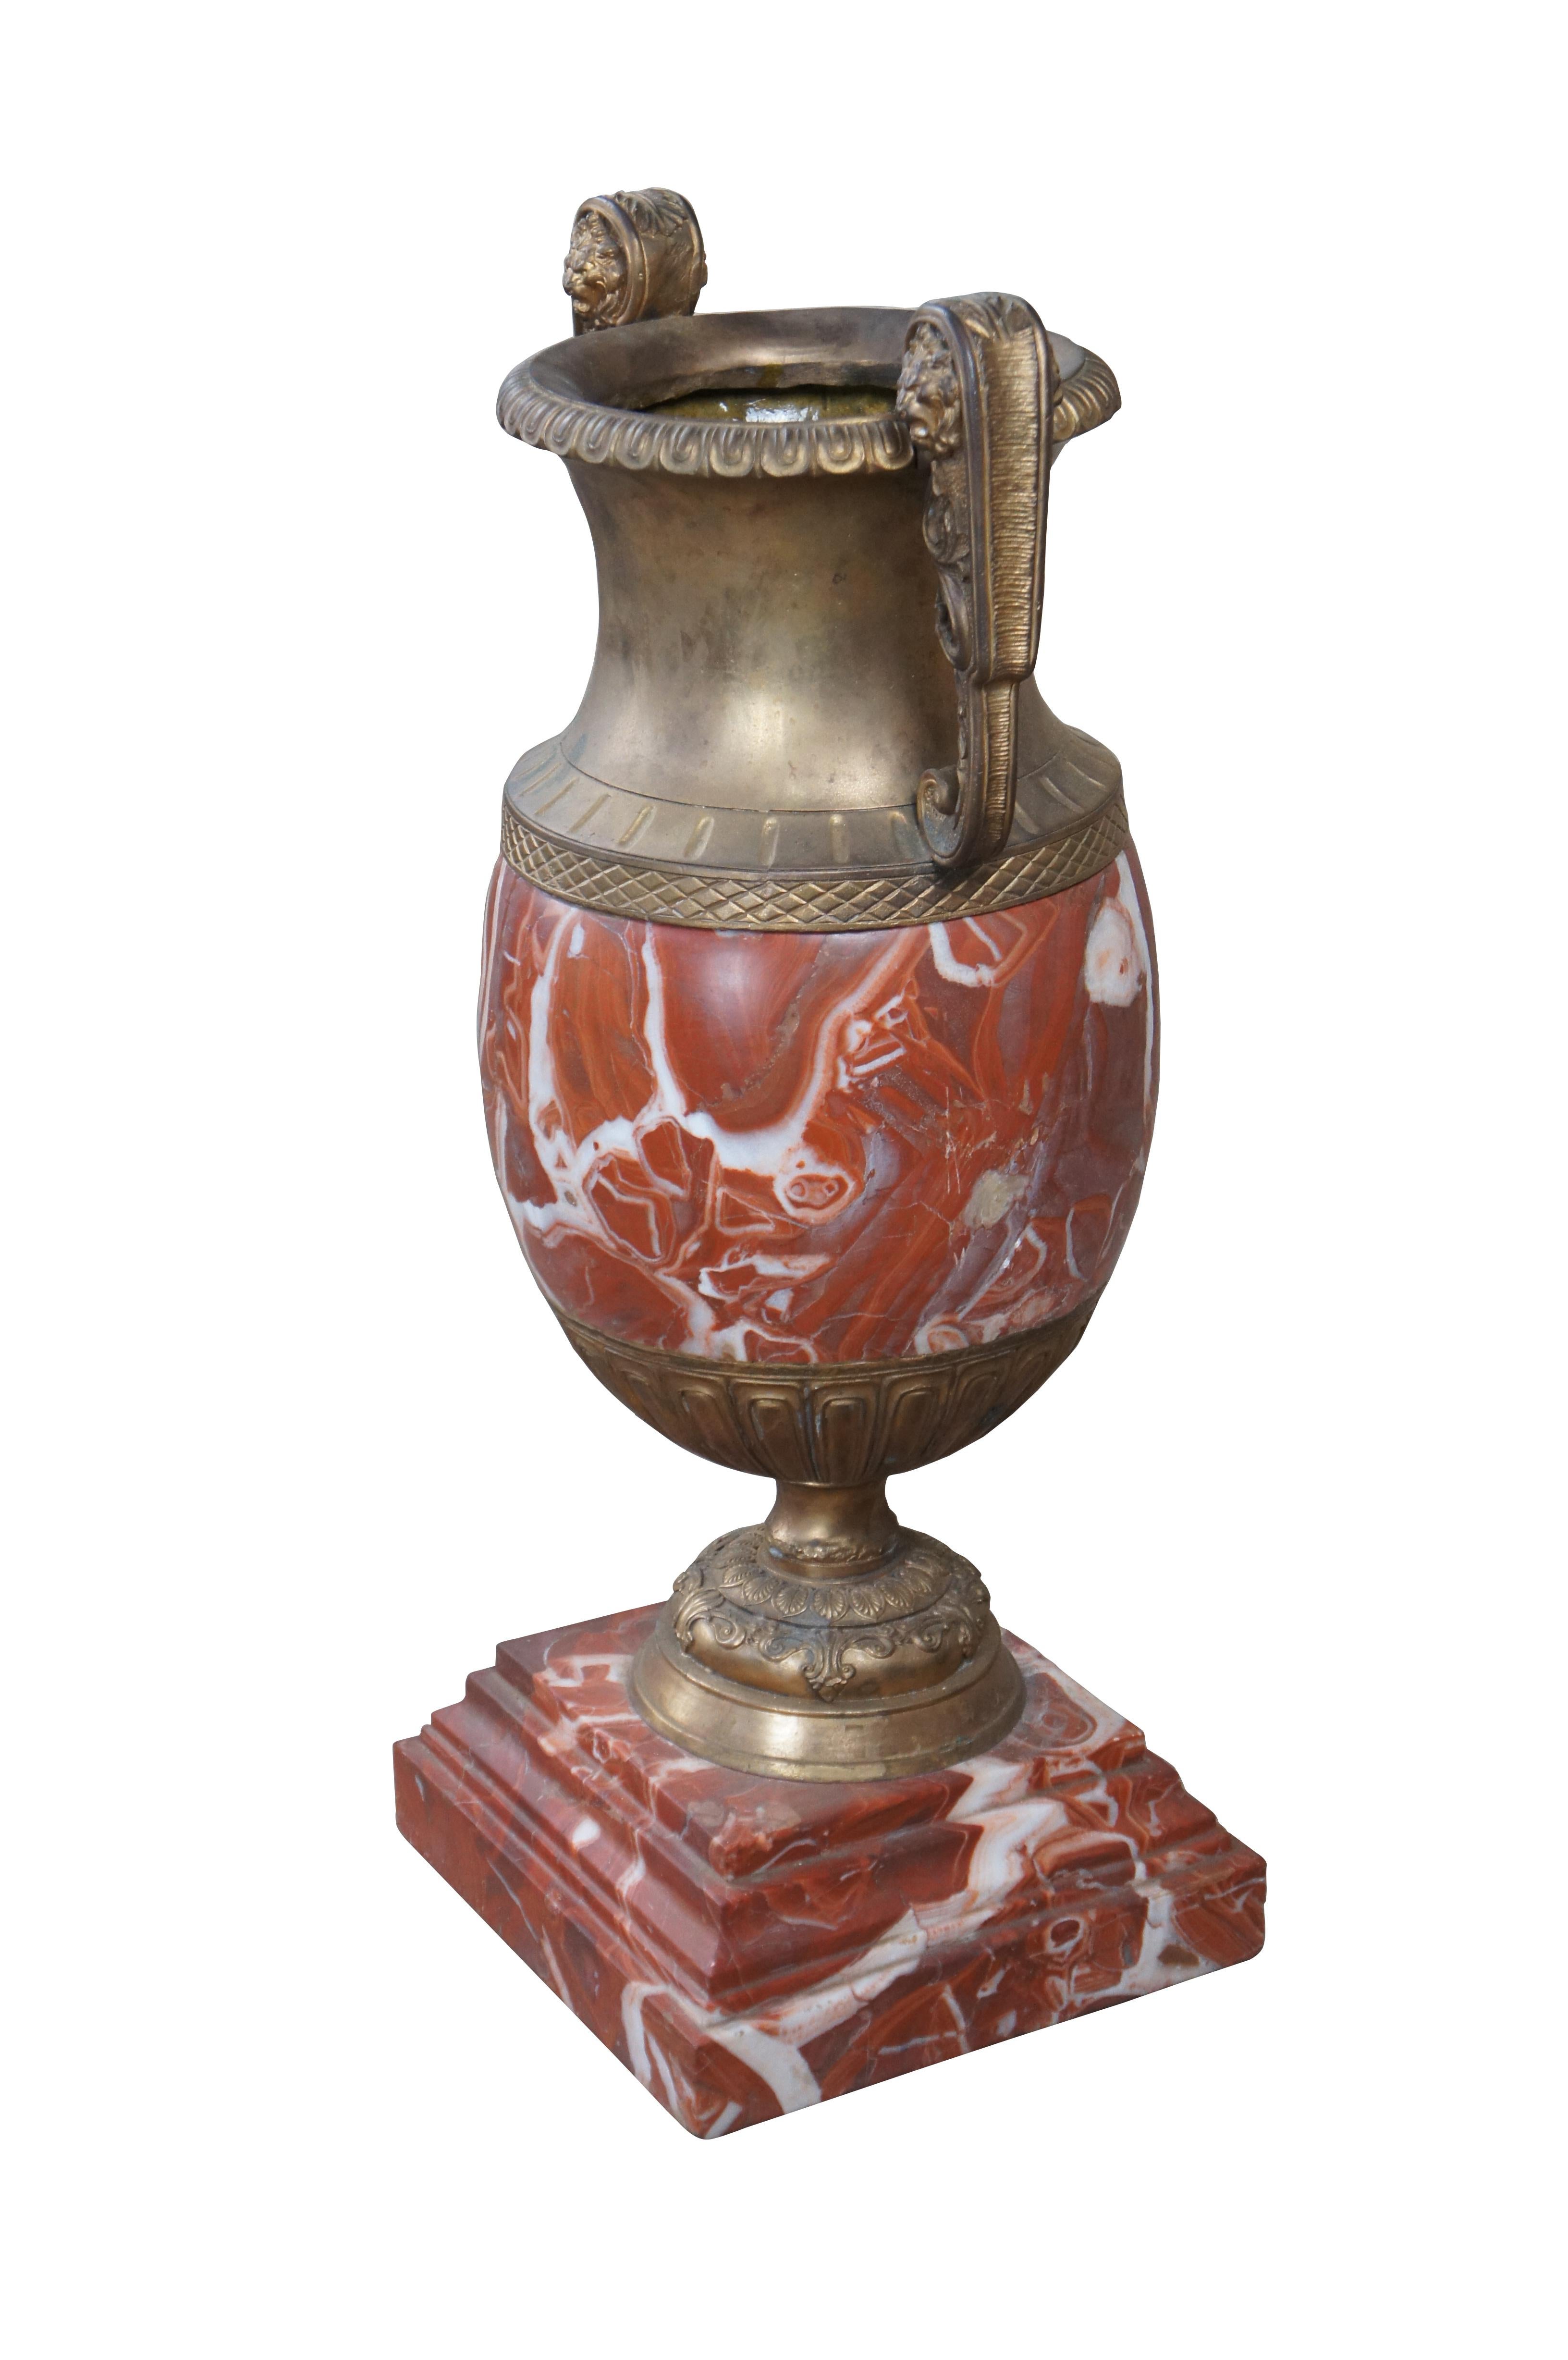 An eye catching late 19th century antique French rouge marble floor or mantel vase. Features a traditional urn shape with bronze mouth accented by ornate lion head mounted handles. Lower side of vase showcases gadrooning over an ornate foliate base.